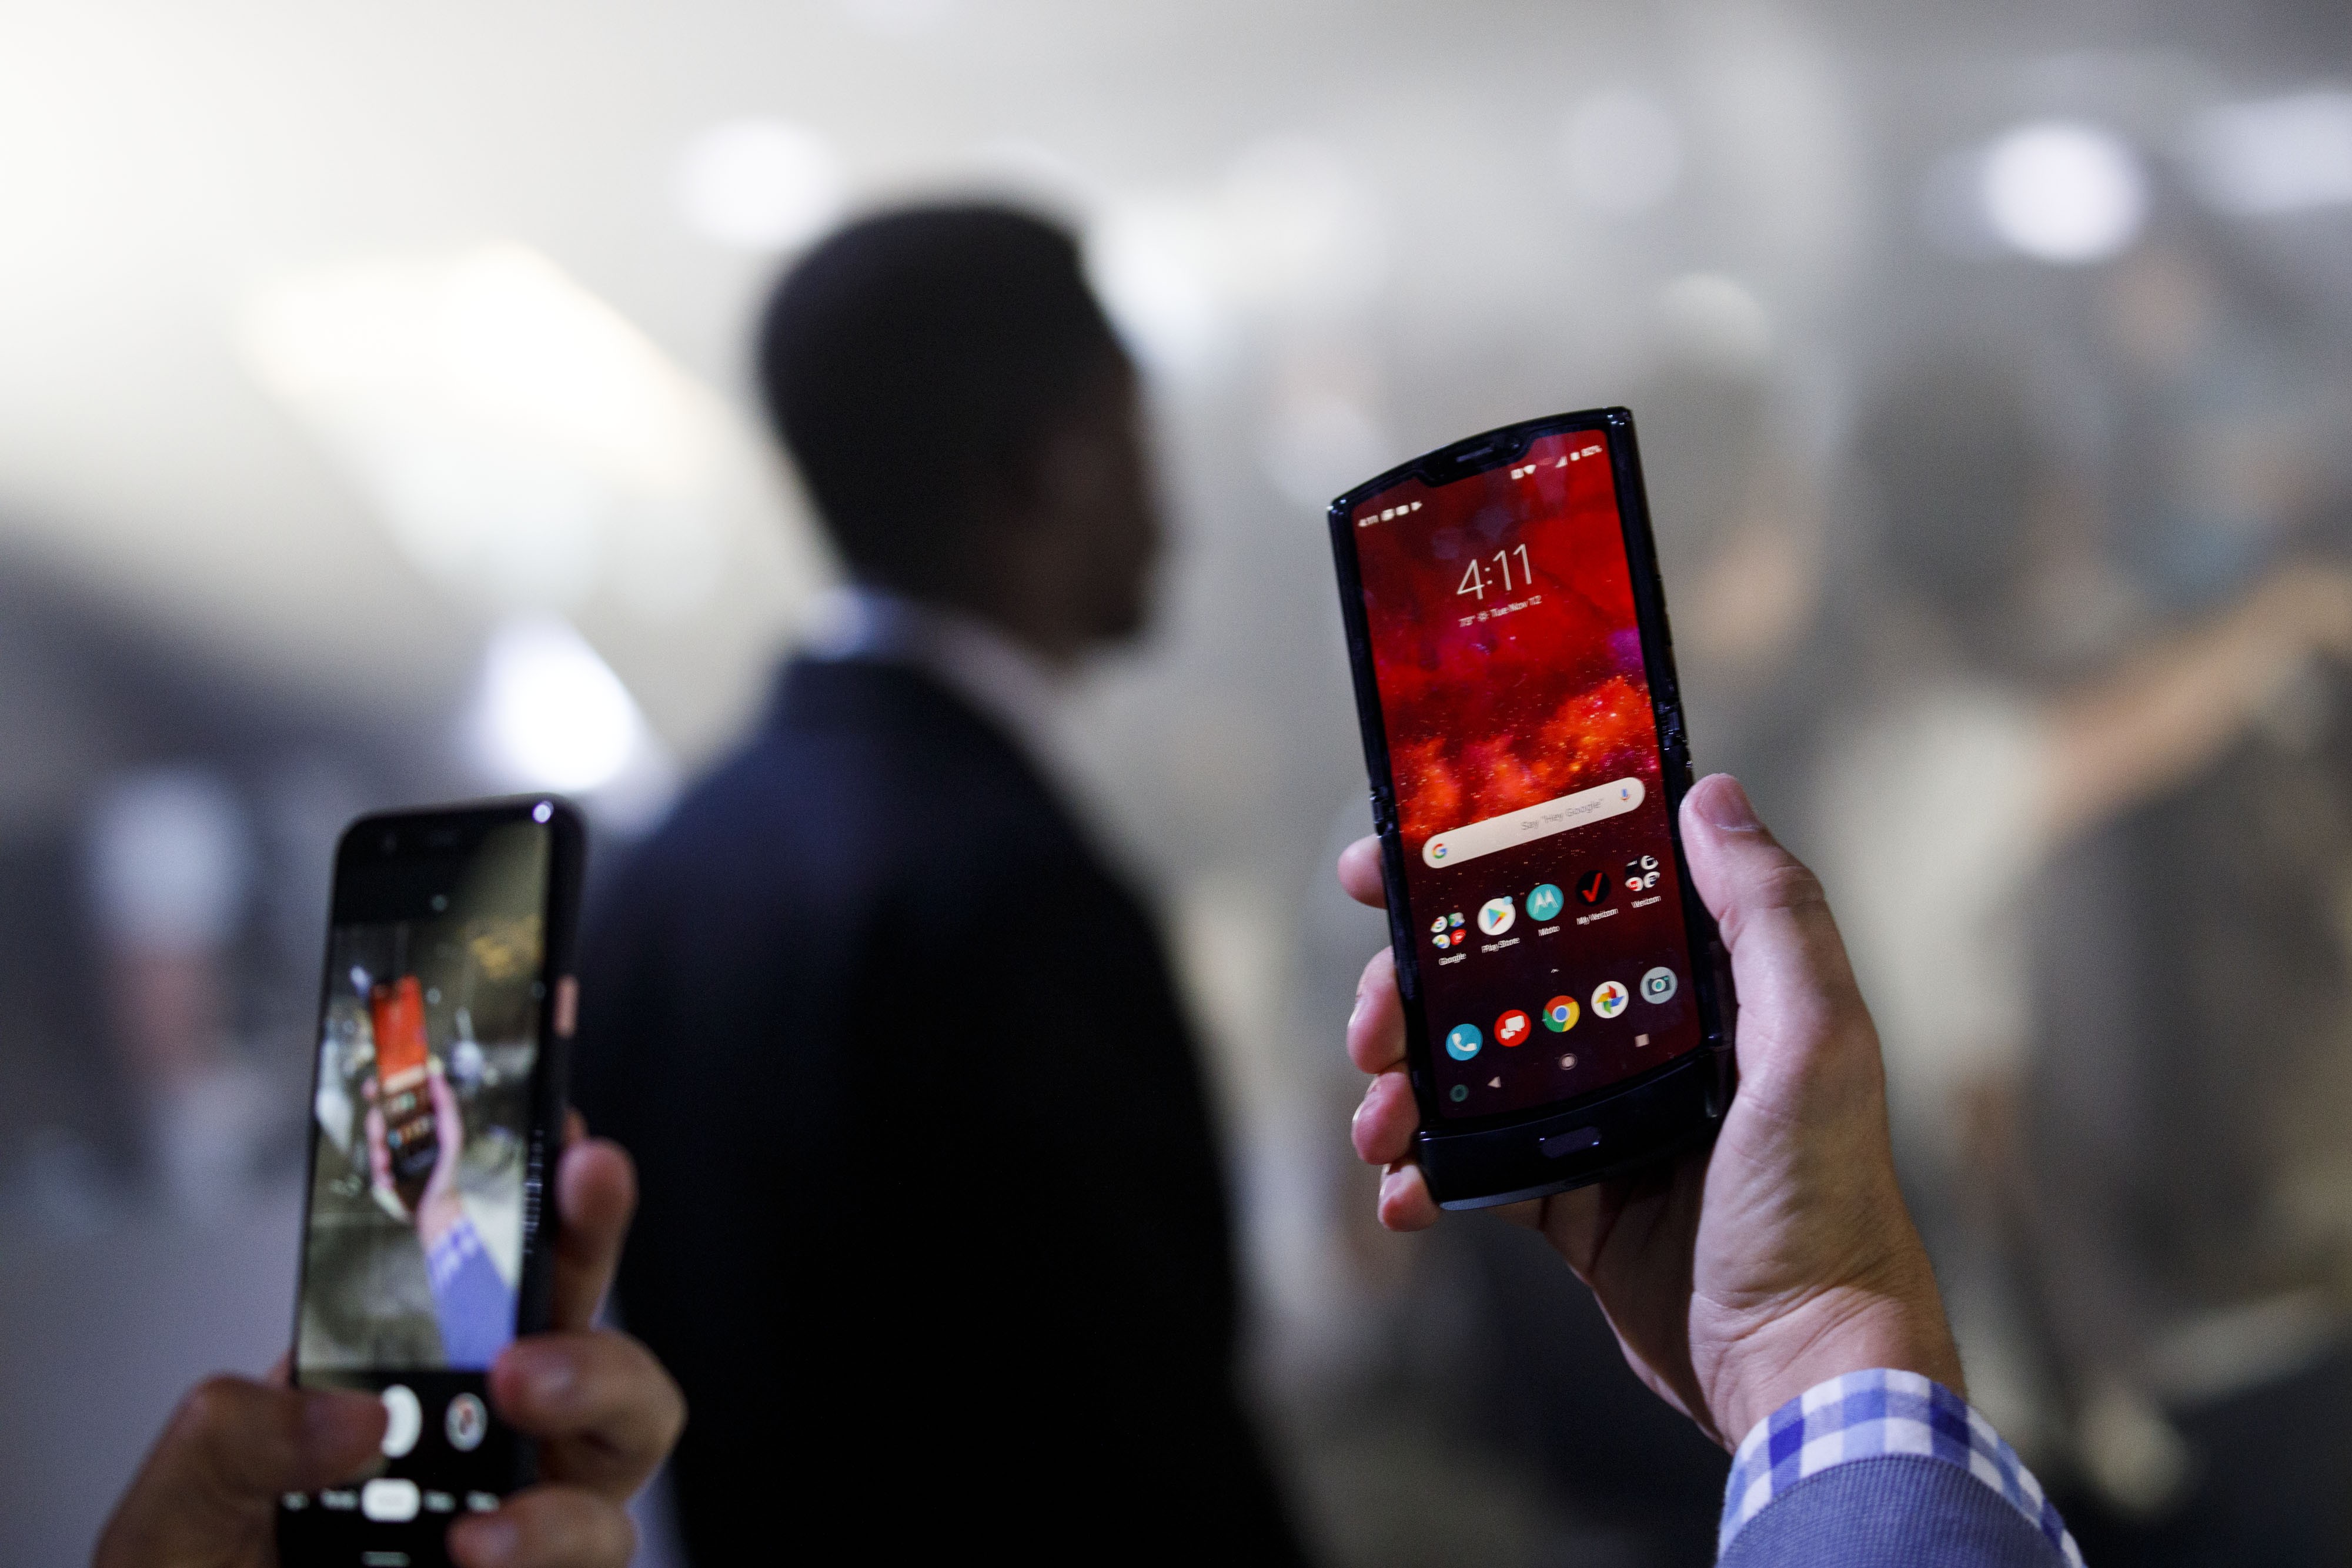 The Lenovo Group Motorola Razr smartphone is showcased during an event in Los Angeles, California, Nov. 13, 2019. Photo: Bloomberg